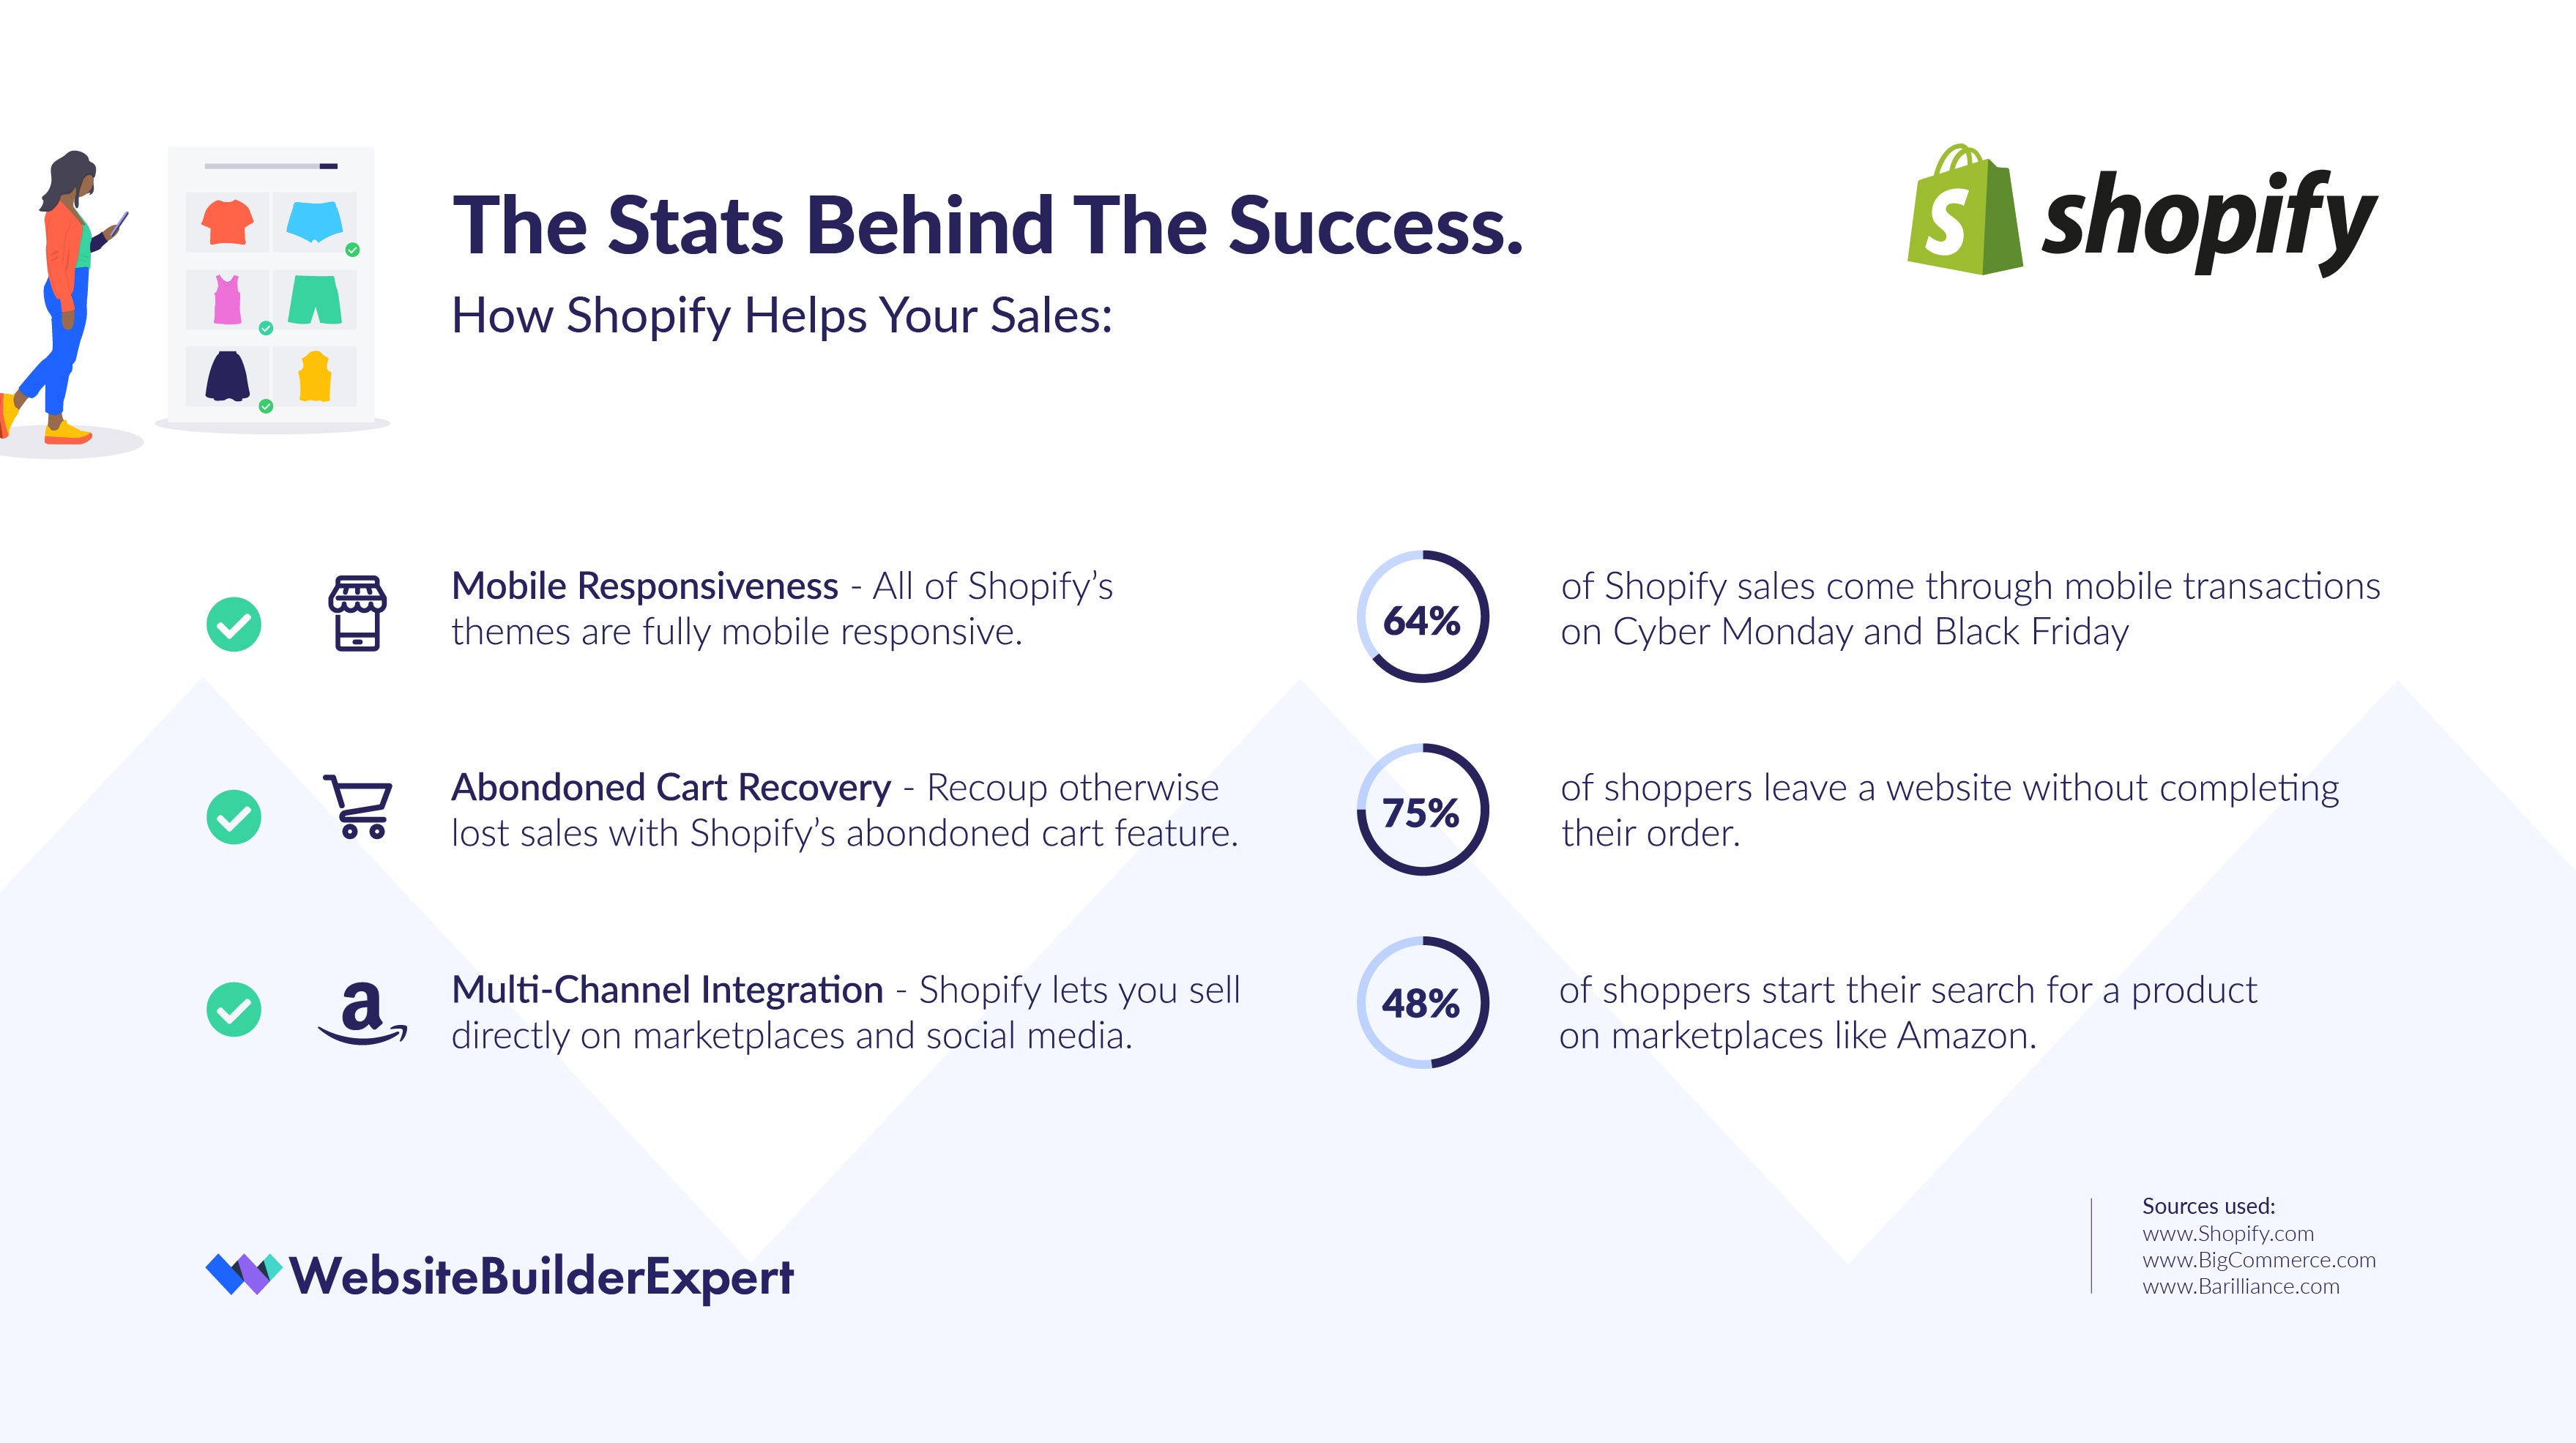 Statistics detailing Shopify's successful sales features